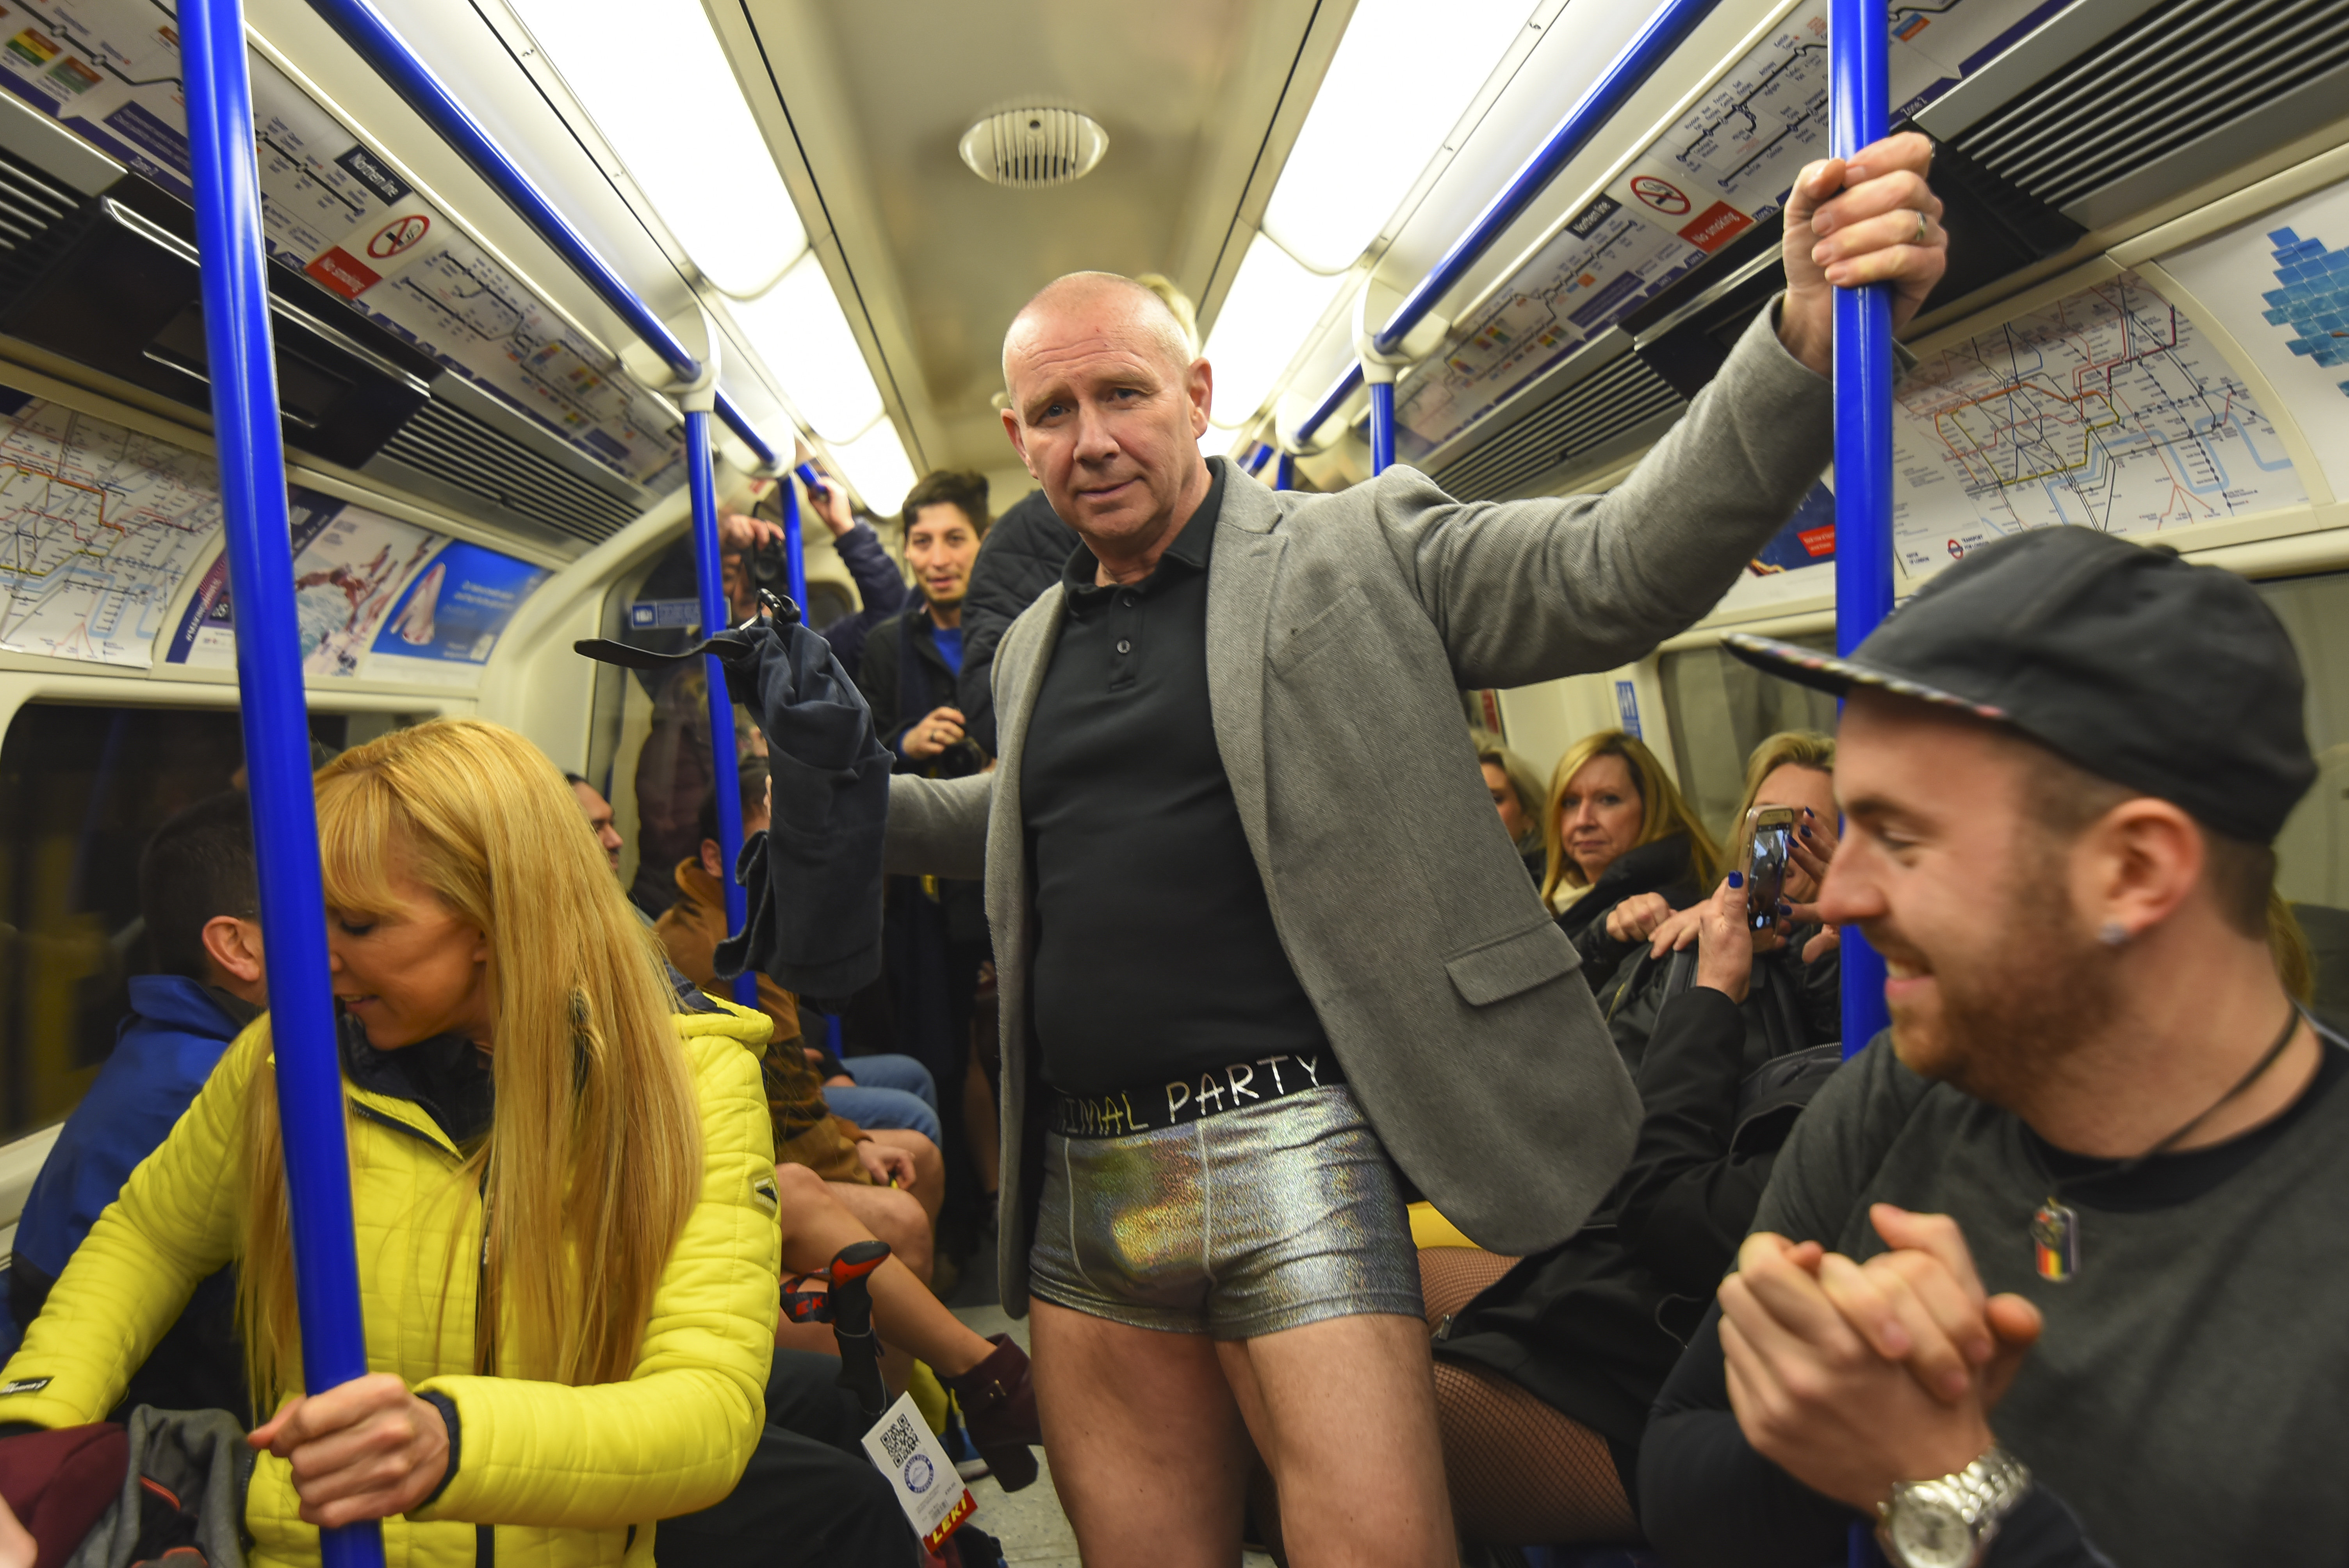 No Pants Day' pranksters shock metro passengers. See the photos here |  Indiatoday